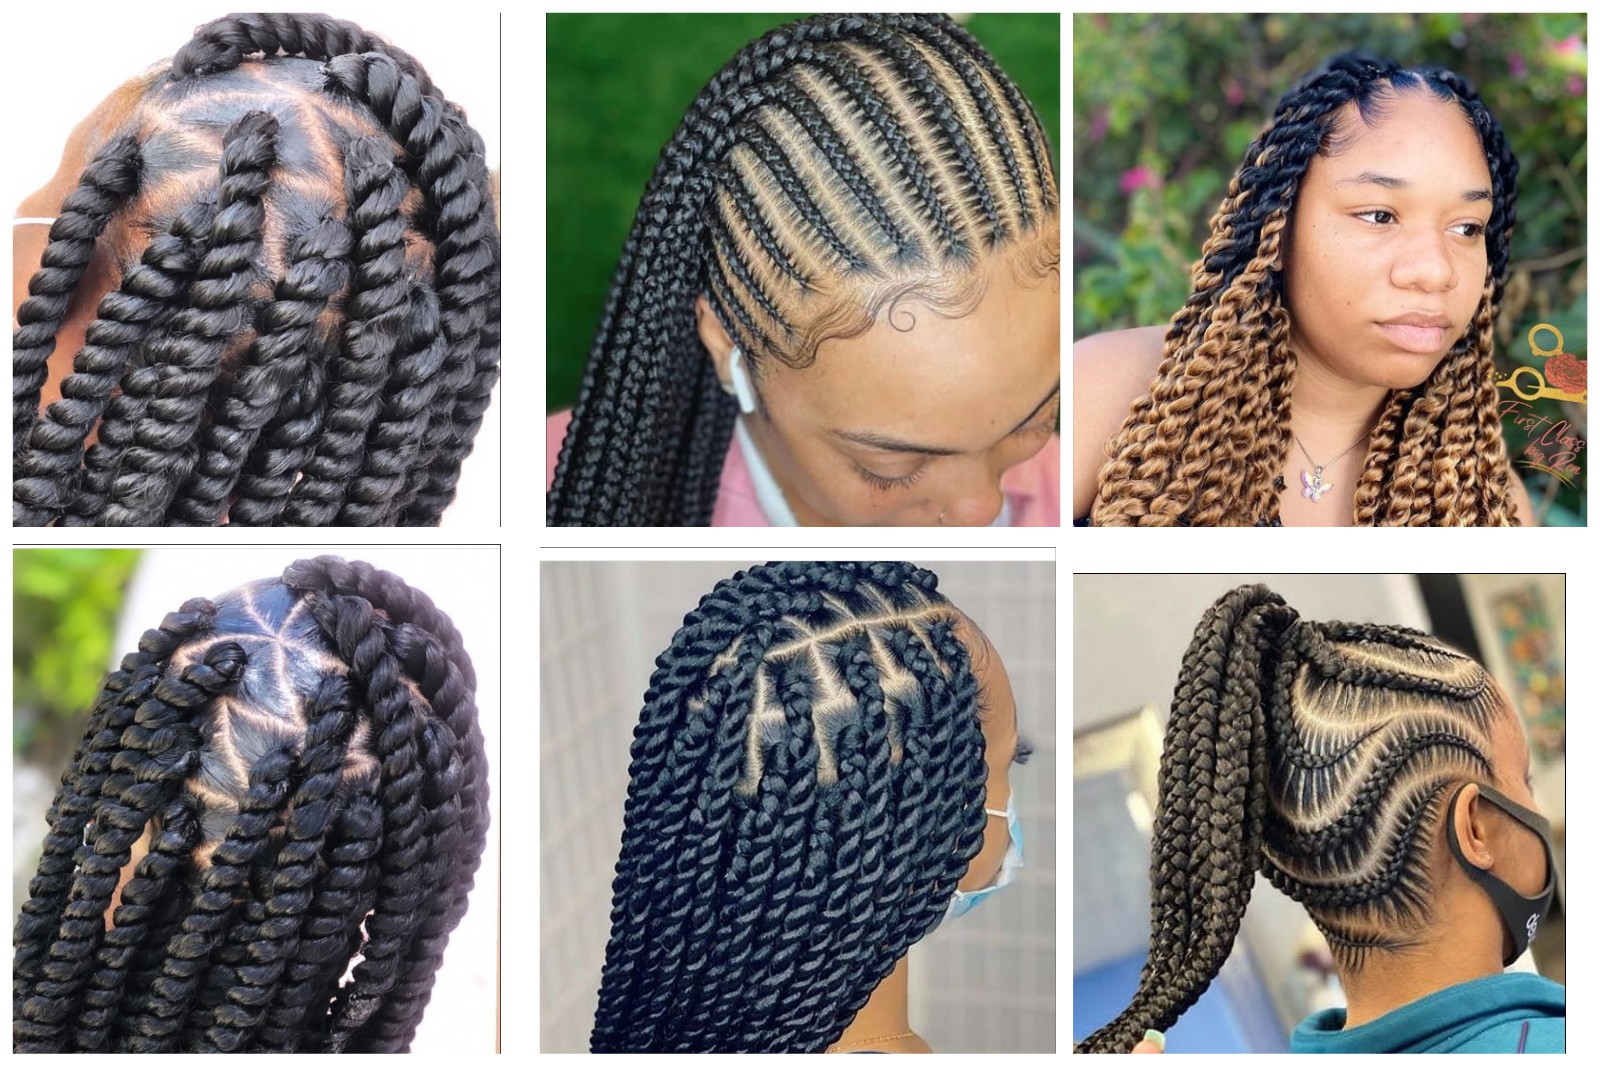 Amazing Twist and Braids Hair Styles for Stylish Ladies